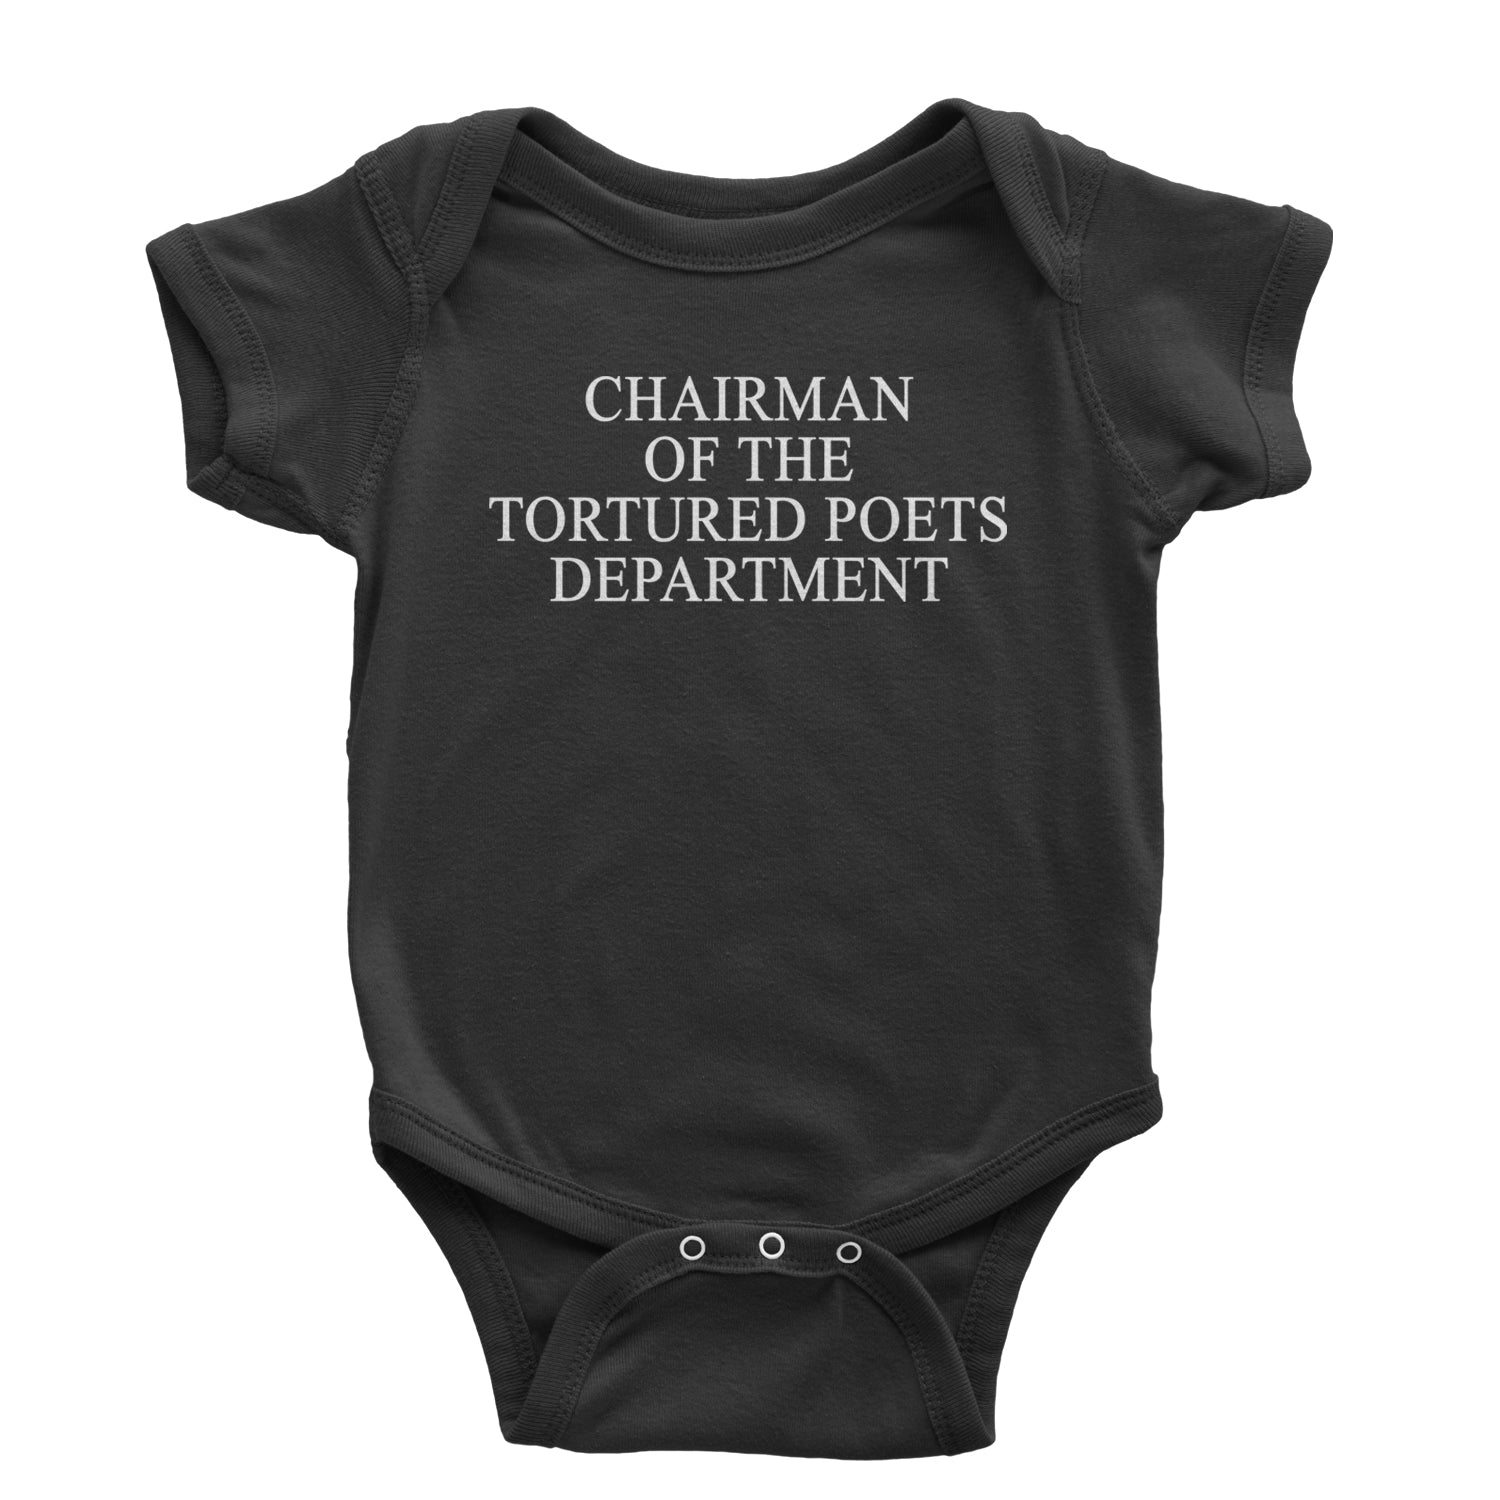 Chairman Of The Tortured Poets Department Infant One-Piece Romper Bodysuit and Toddler T-shirt